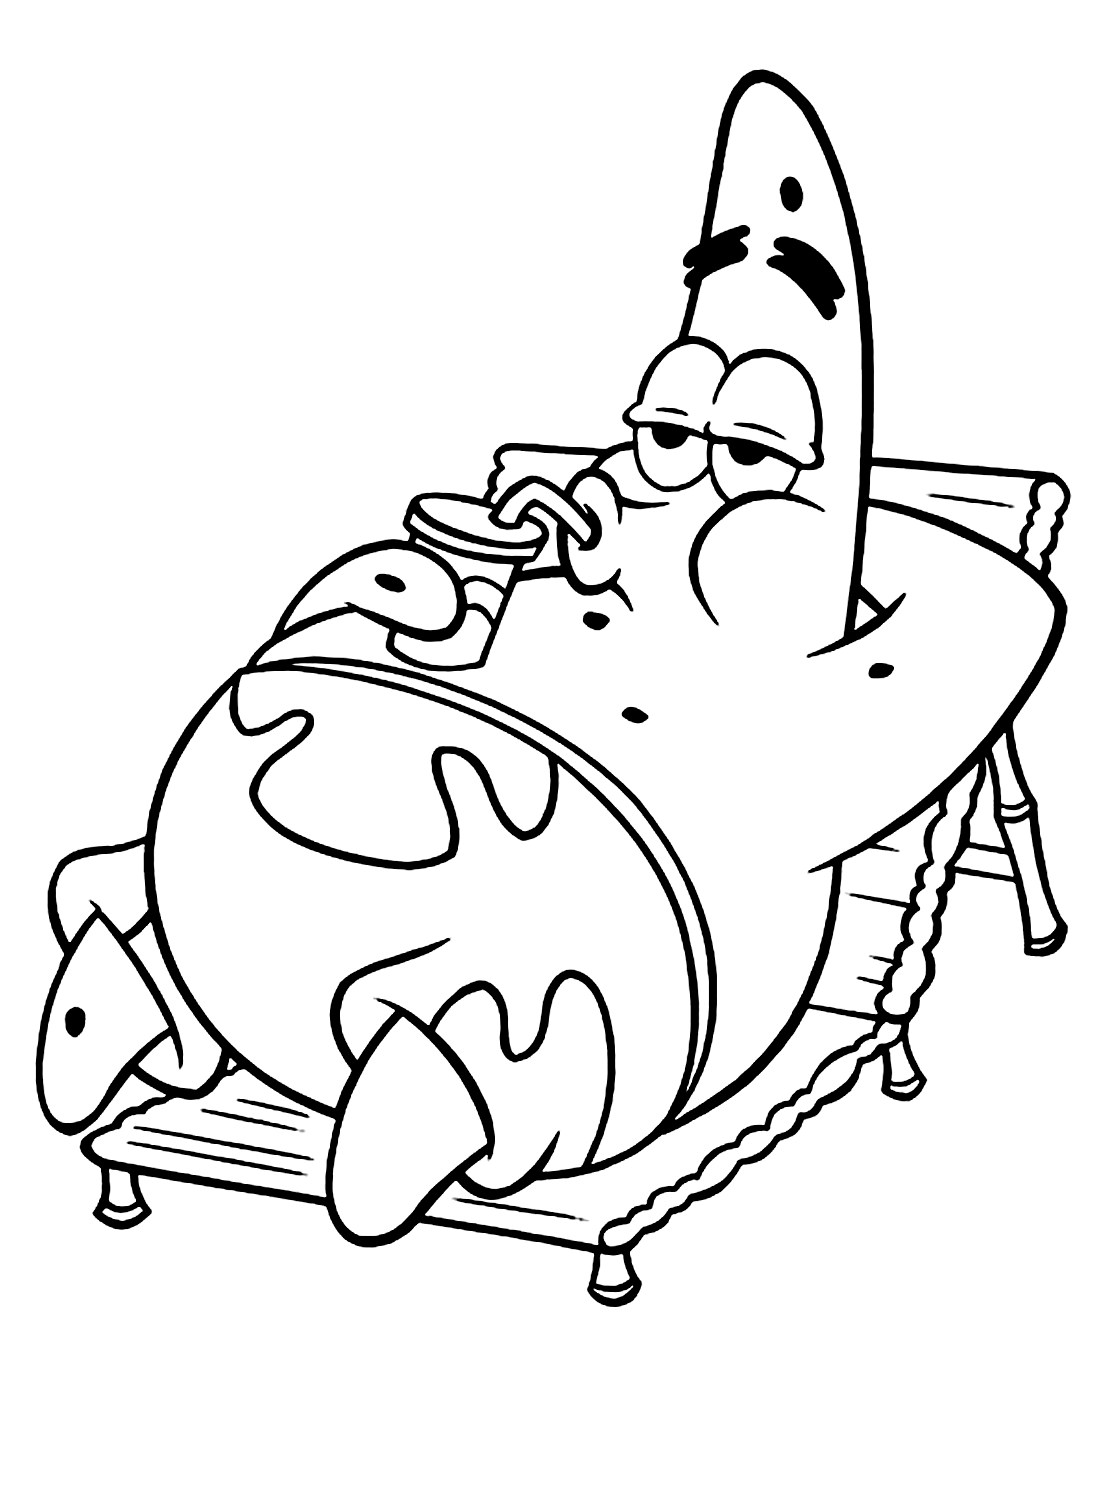 Relaxing Patrick Color Picture from Spongebob